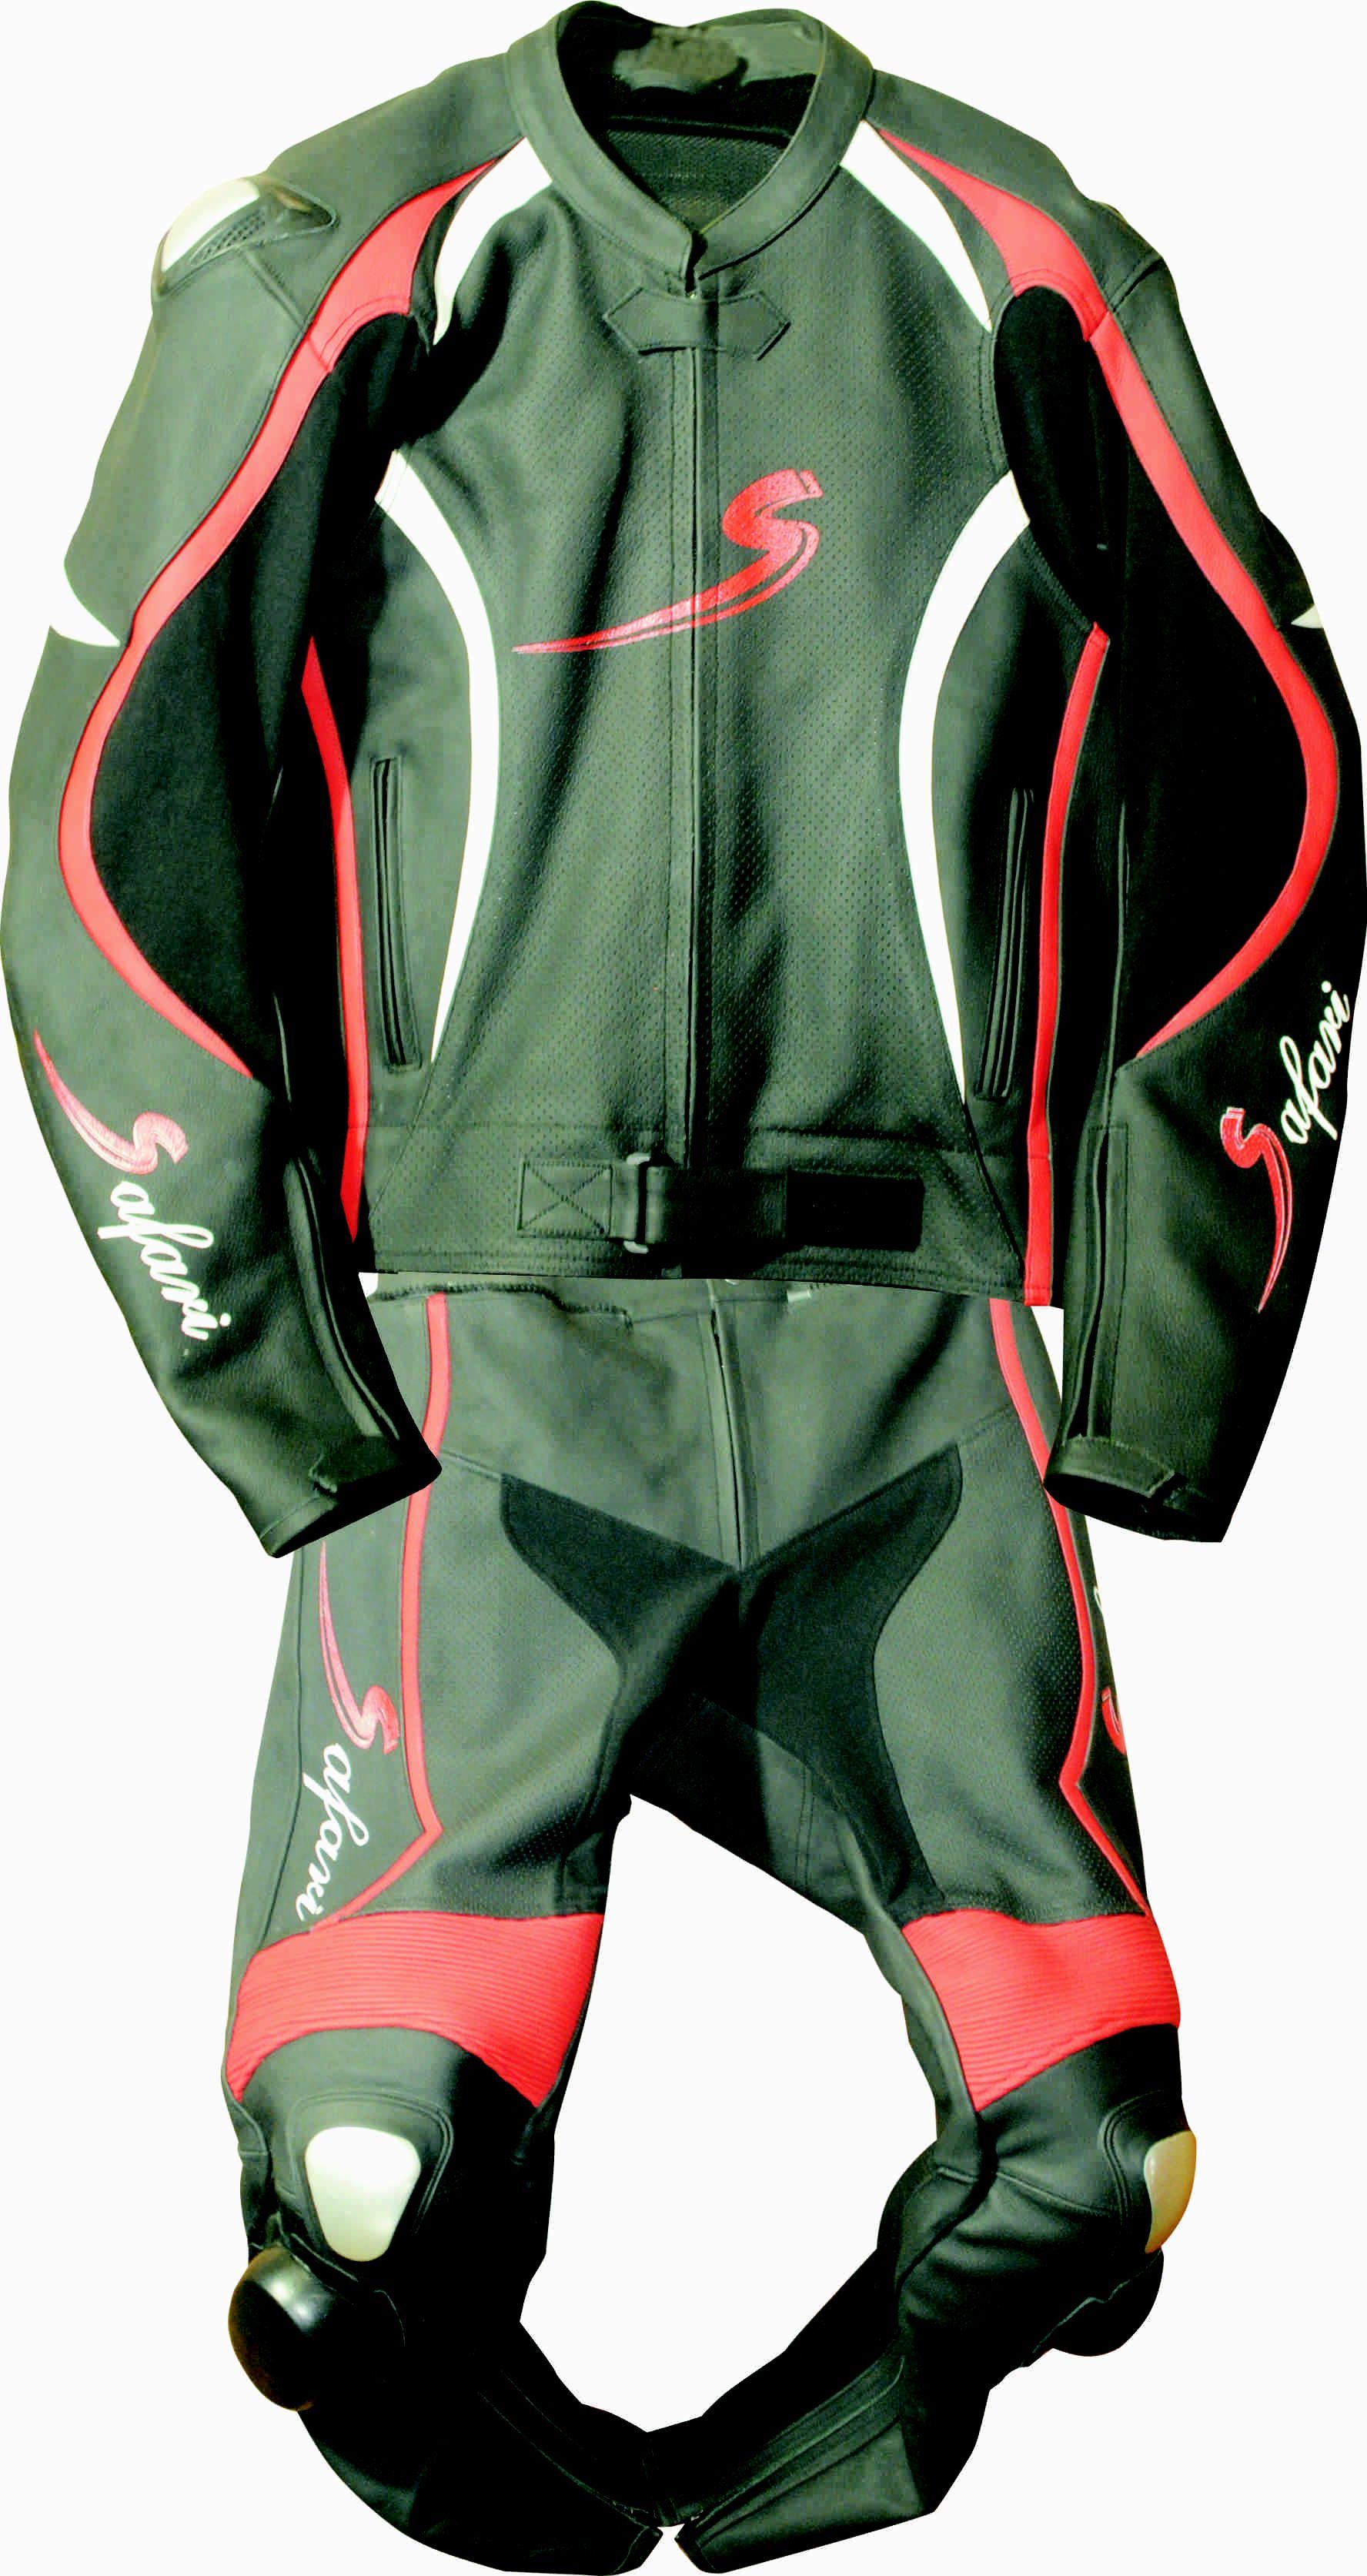 an example of a two piece suit that can be zipped together for track use.